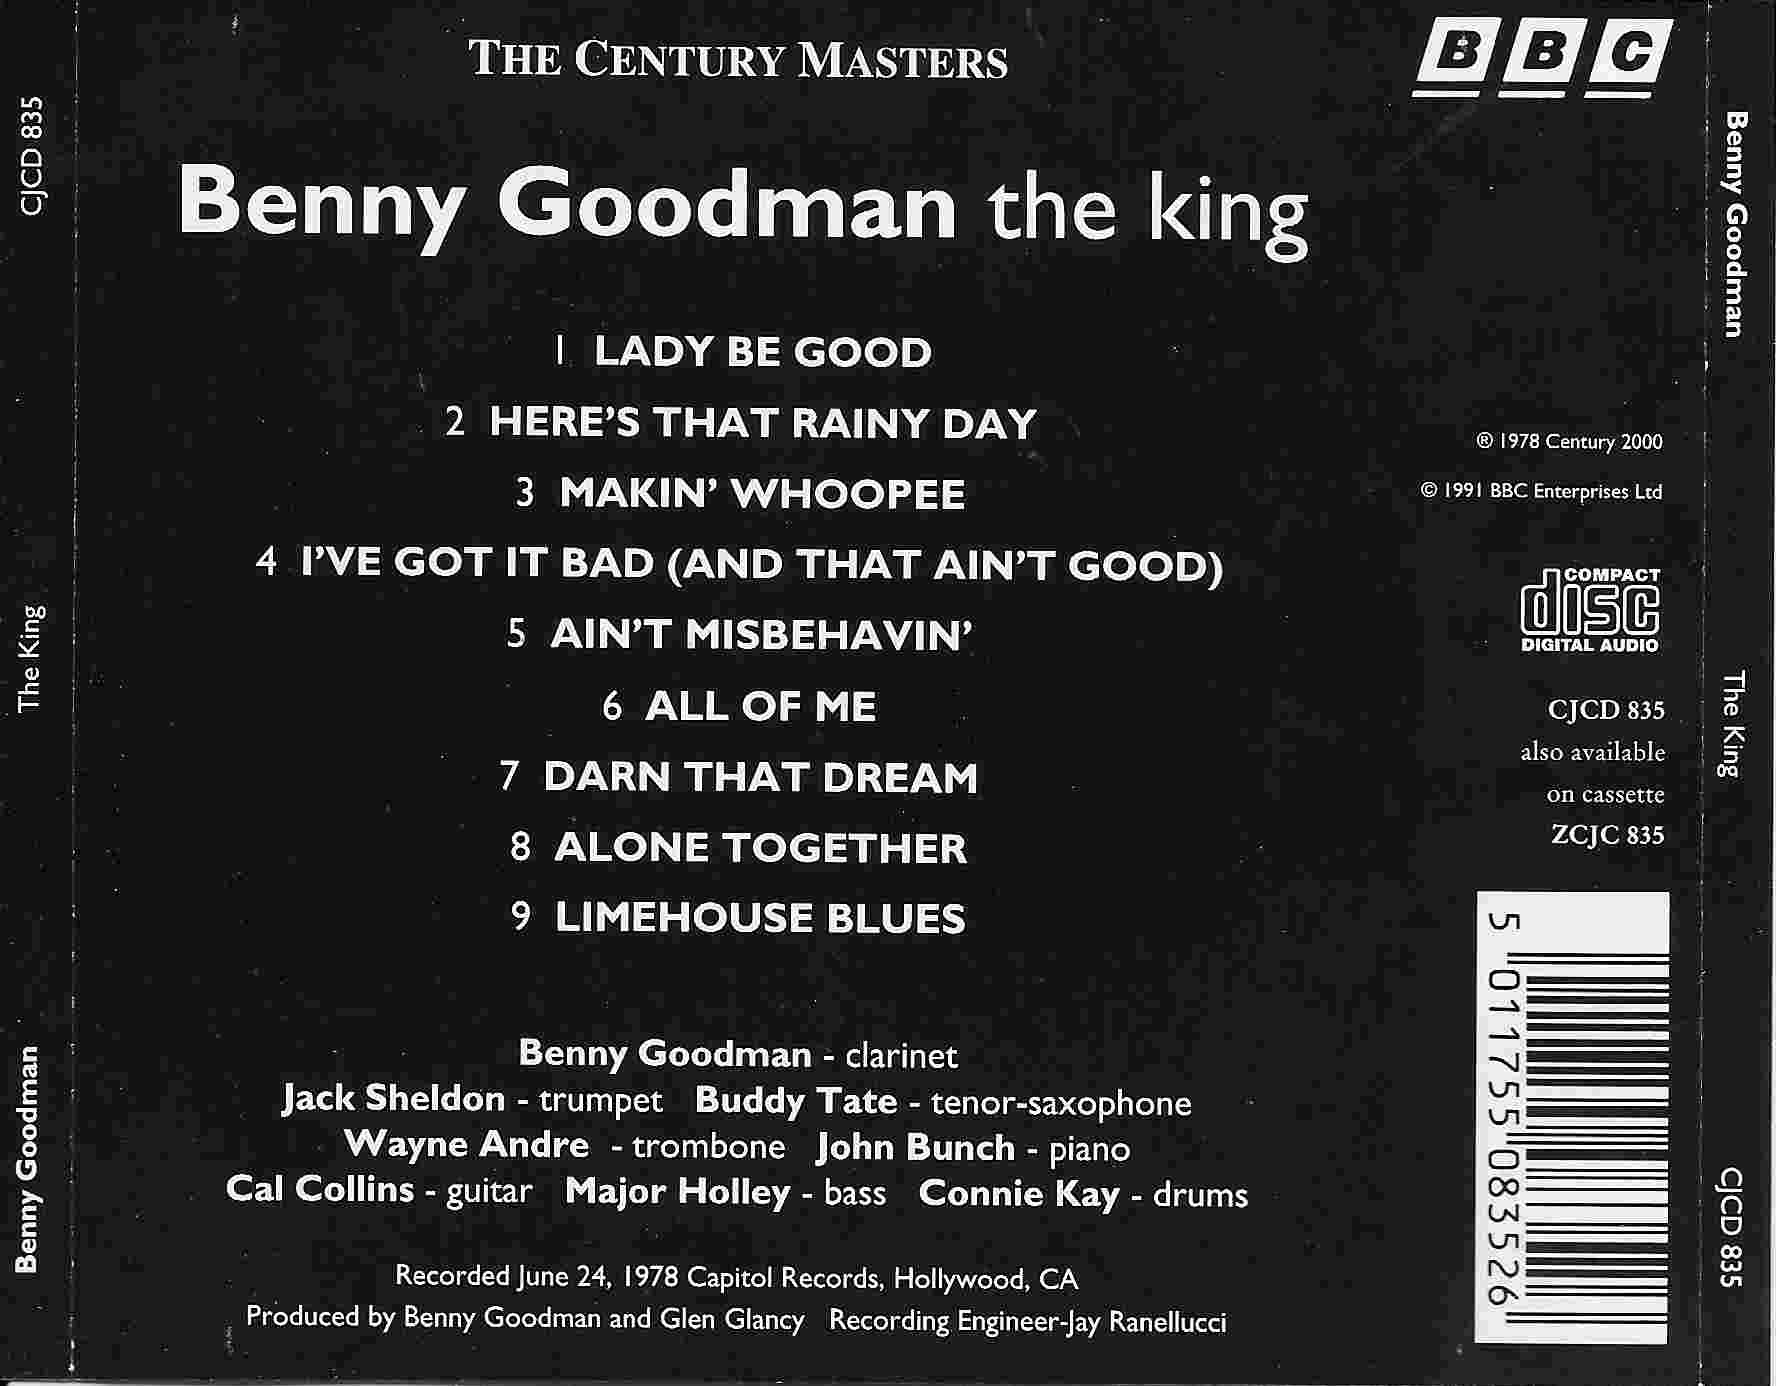 Picture of CJCD 835 The Century Catalogue - The king by artist Benny Goodman from the BBC records and Tapes library